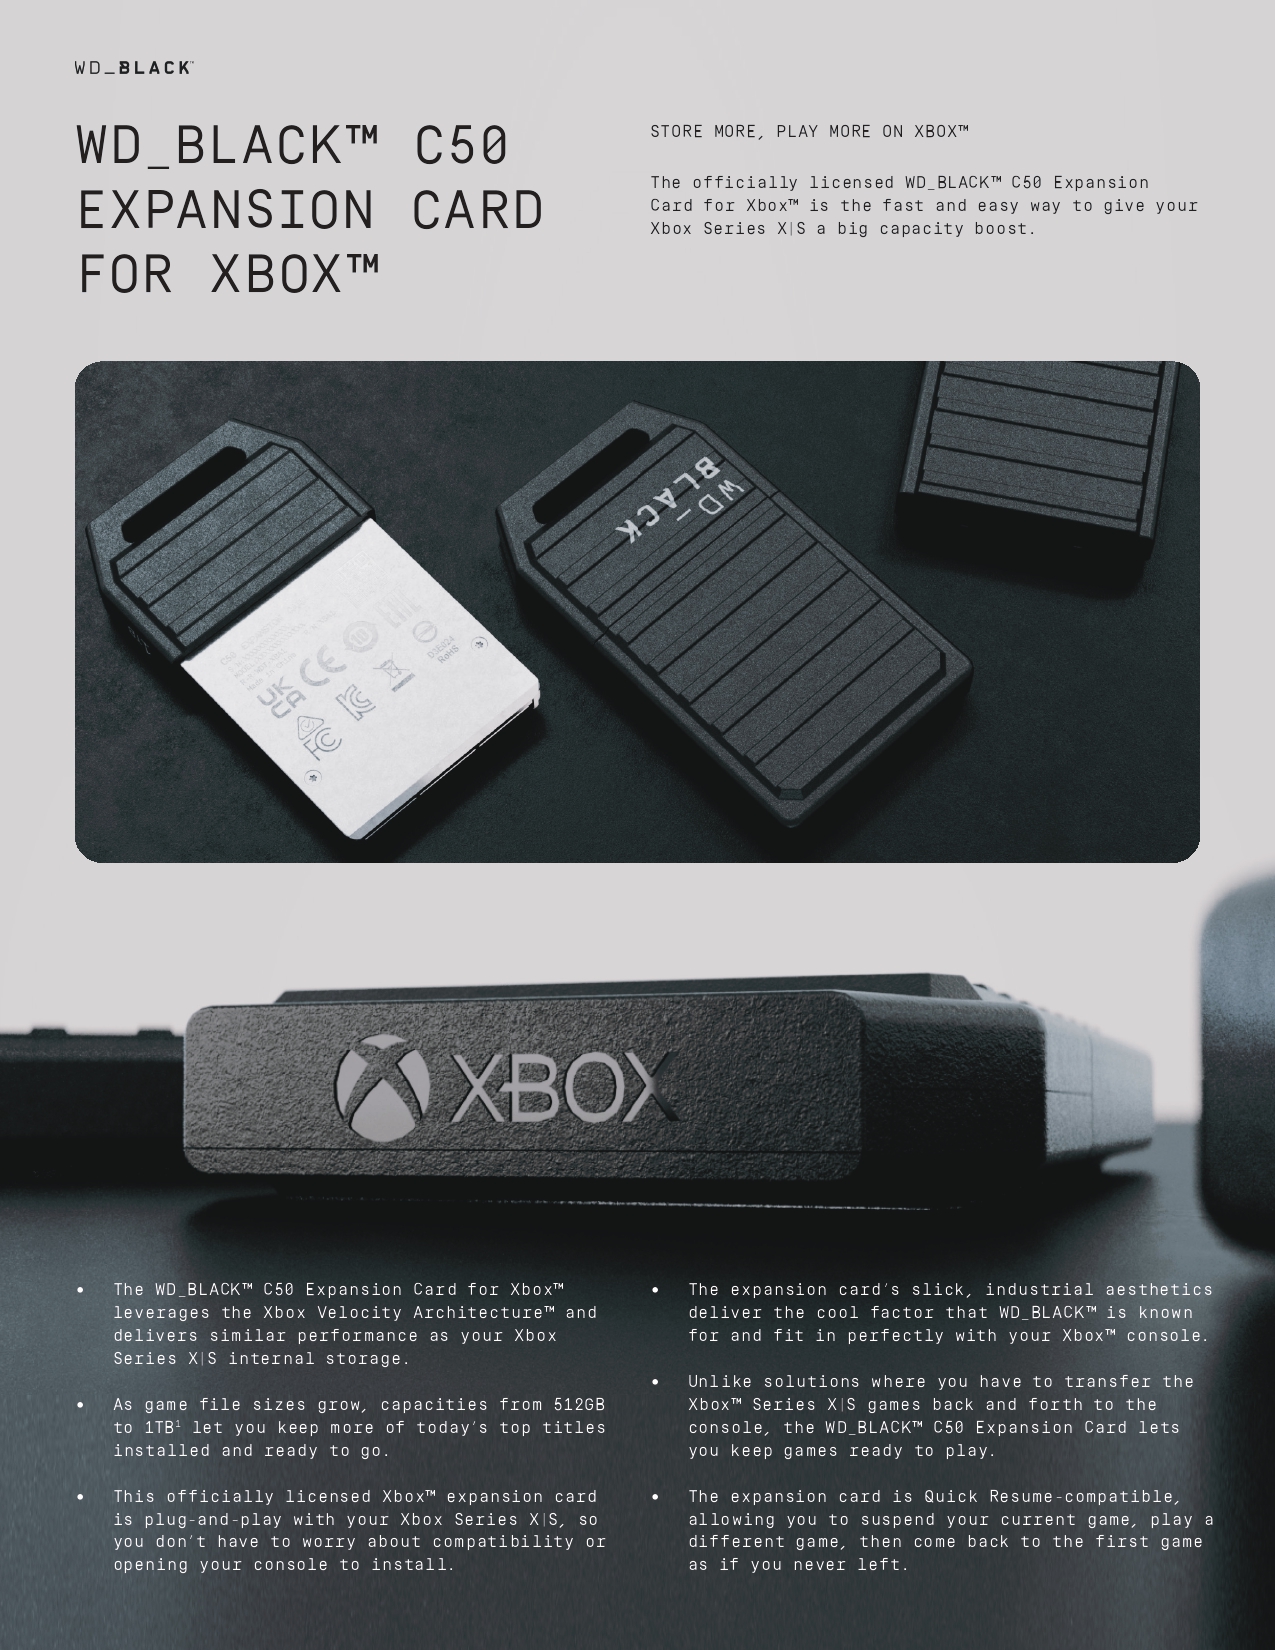 data-sheet-wd-black-c50-expansion-card-for-xbox-ssd_pages-to-jpg-0001.jpg